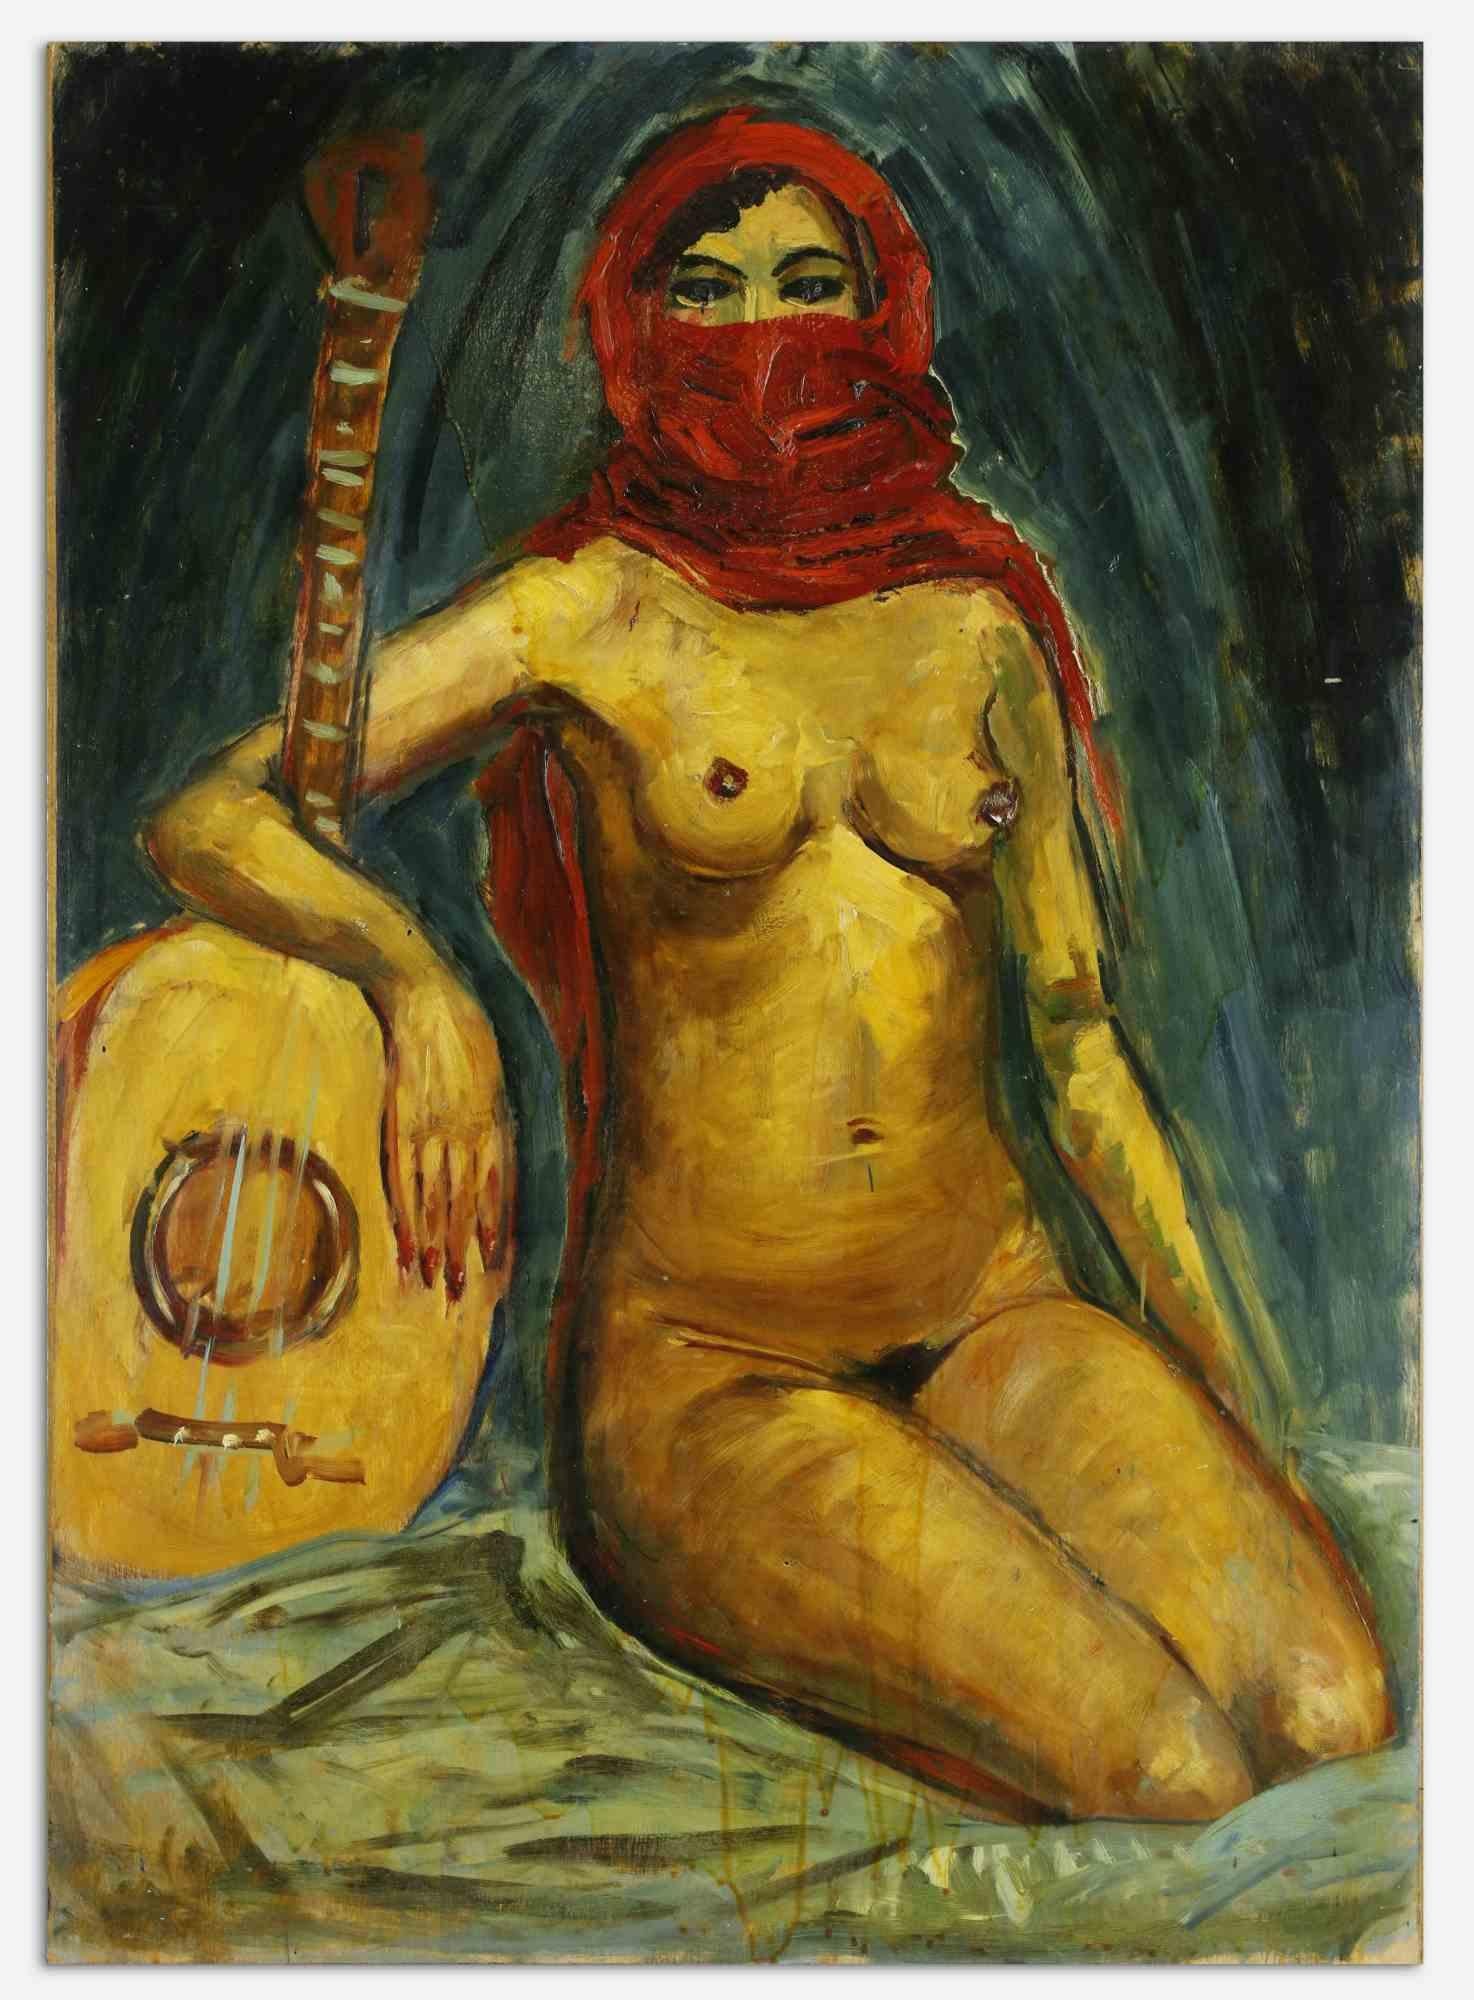 Odalisque and Guitar is an orignal modern artwork realized by Antonio Feltrinelli in 1930s.

Mixed colored oil painting on board.

Signed on the back

Antonio Feltrinelli (Milan, 1887 – Gargnano, 1942)
He was born in Milan on June 1, 1887 to